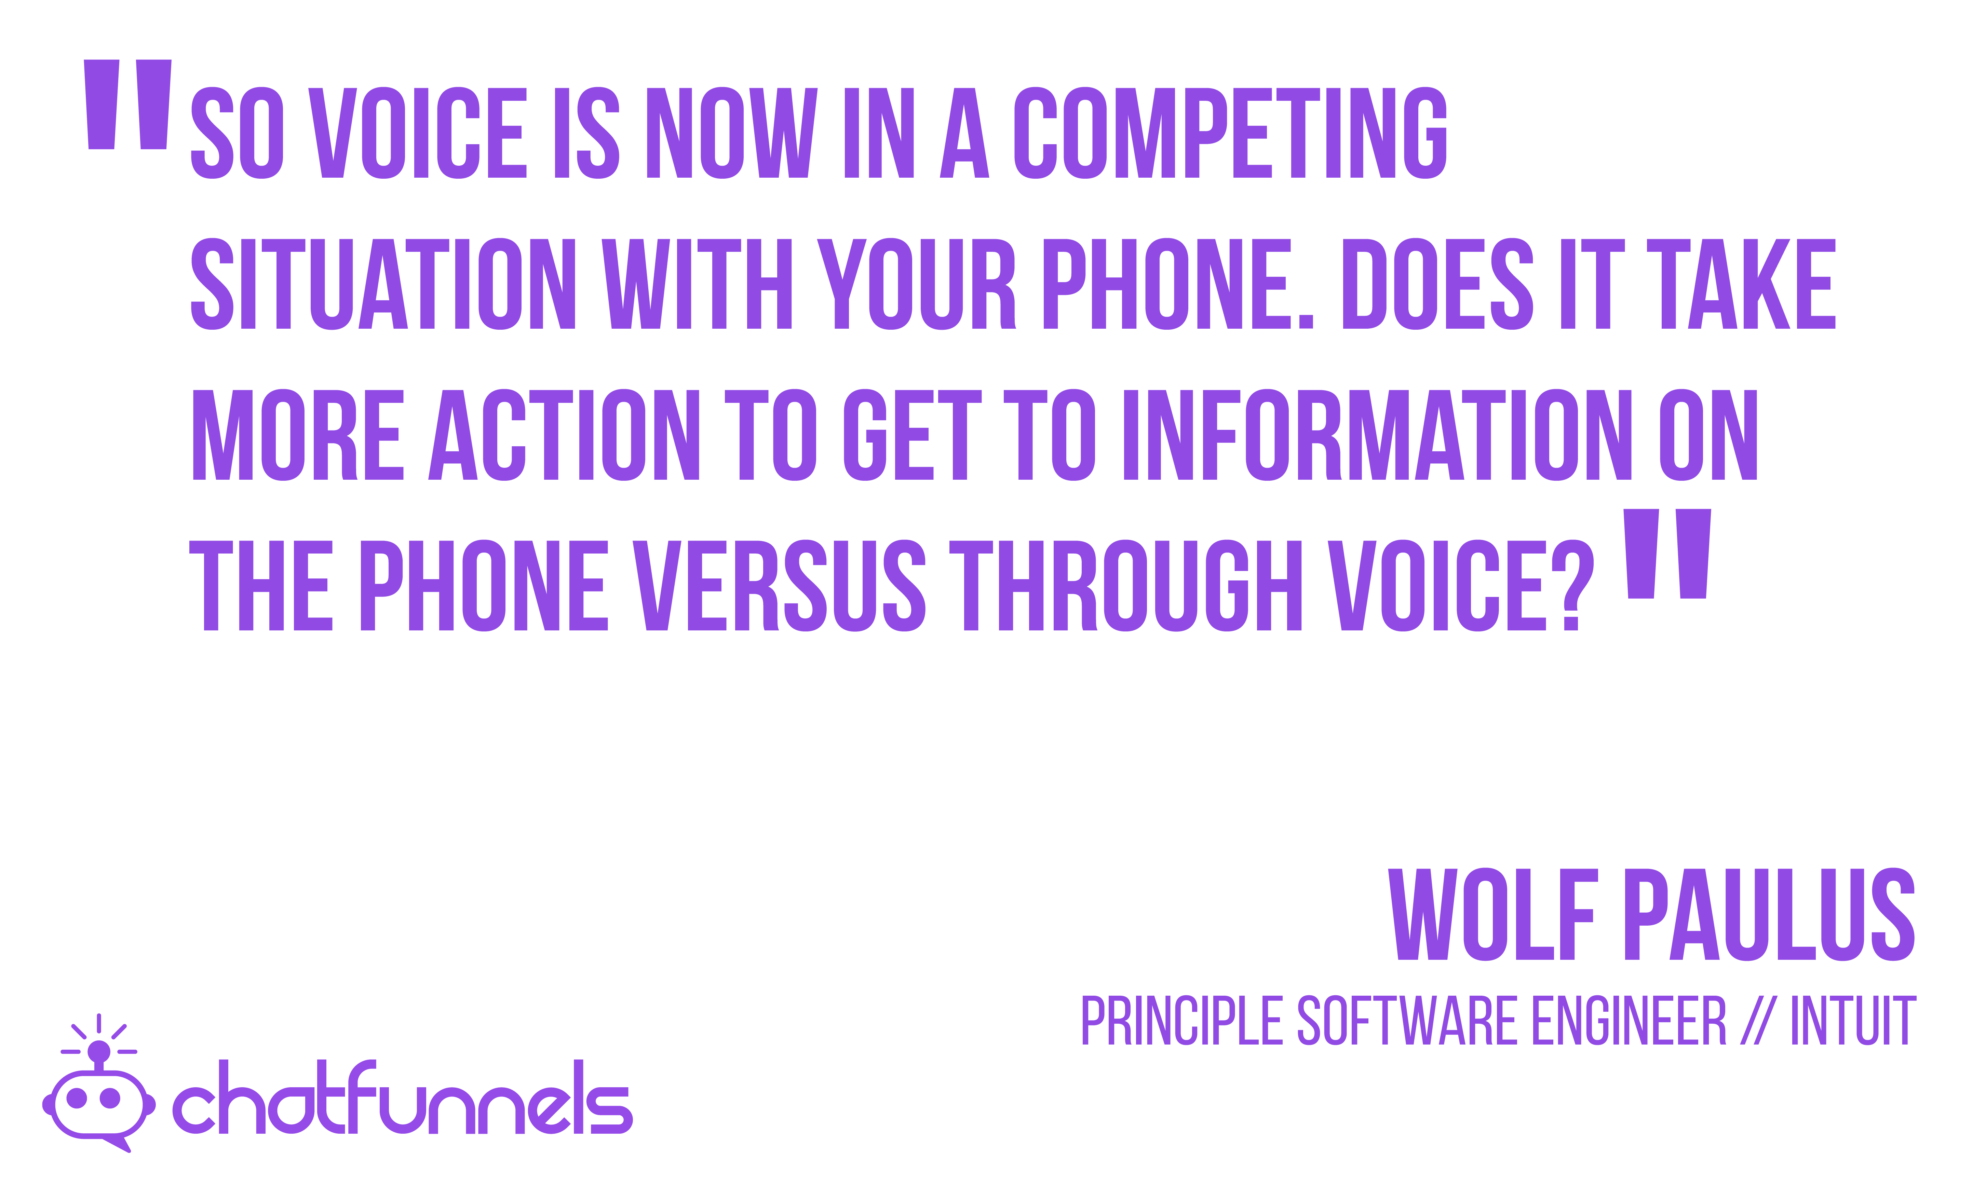 So voice is now in a competing situation with your phone. Does it take more action to get to information on the phone versus through voice?